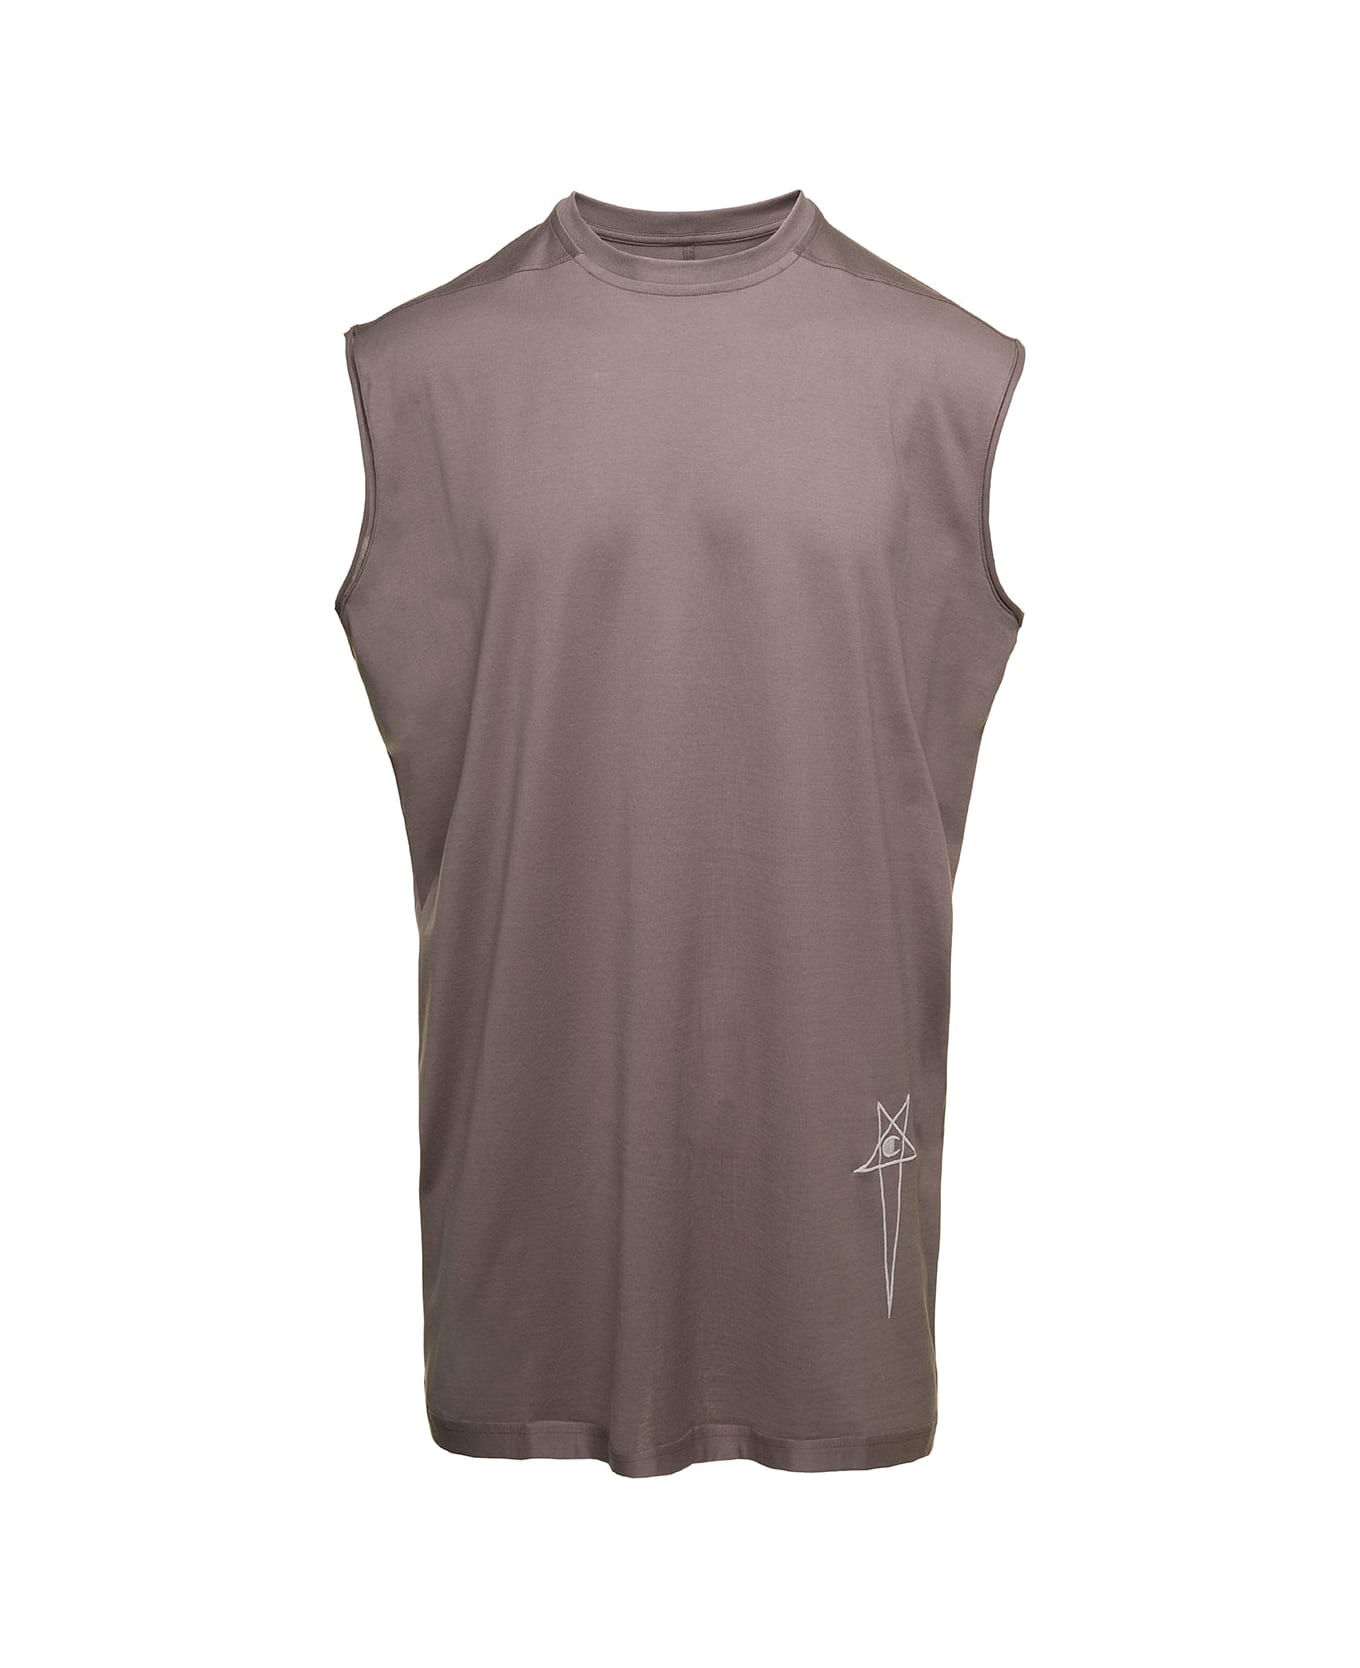 Rick Owens x Champion 'tarp T' Grey Sleeveless Top With Small Pentagram Embroidery In Cotton Man - DUST